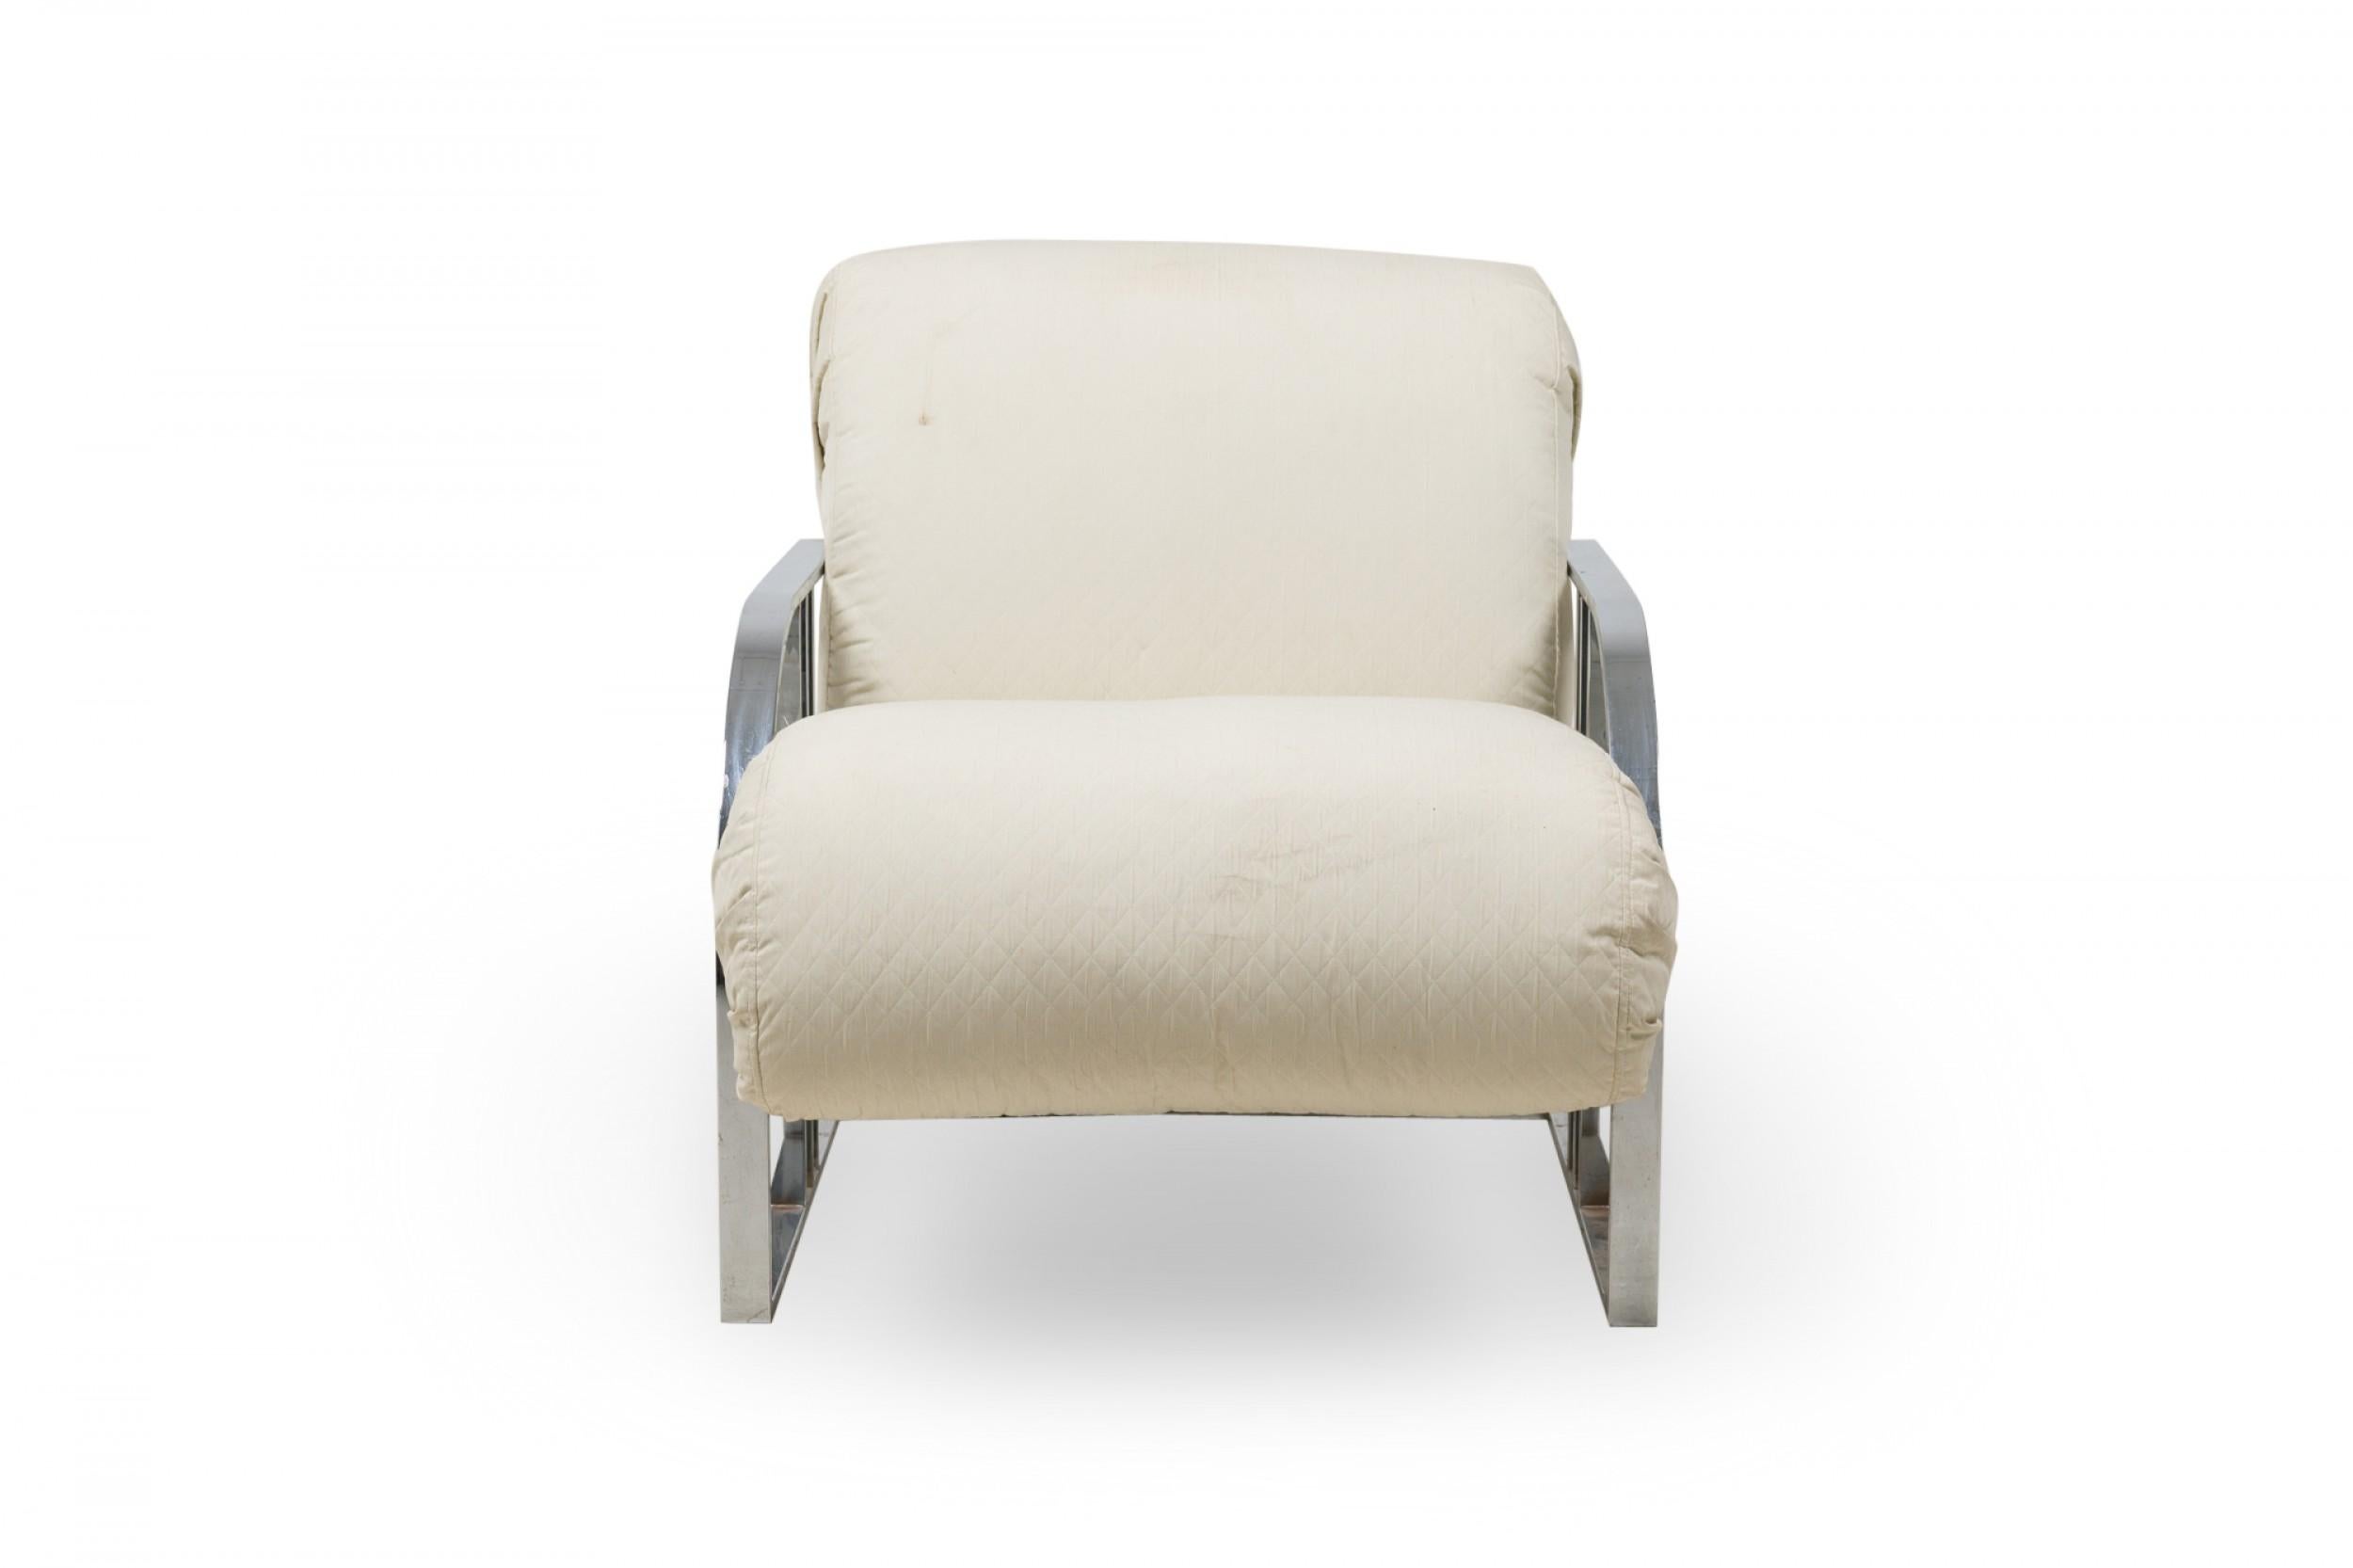 Milo Baughman for Thayer Coggin American Chrome Off-White Upholstered Armchair For Sale